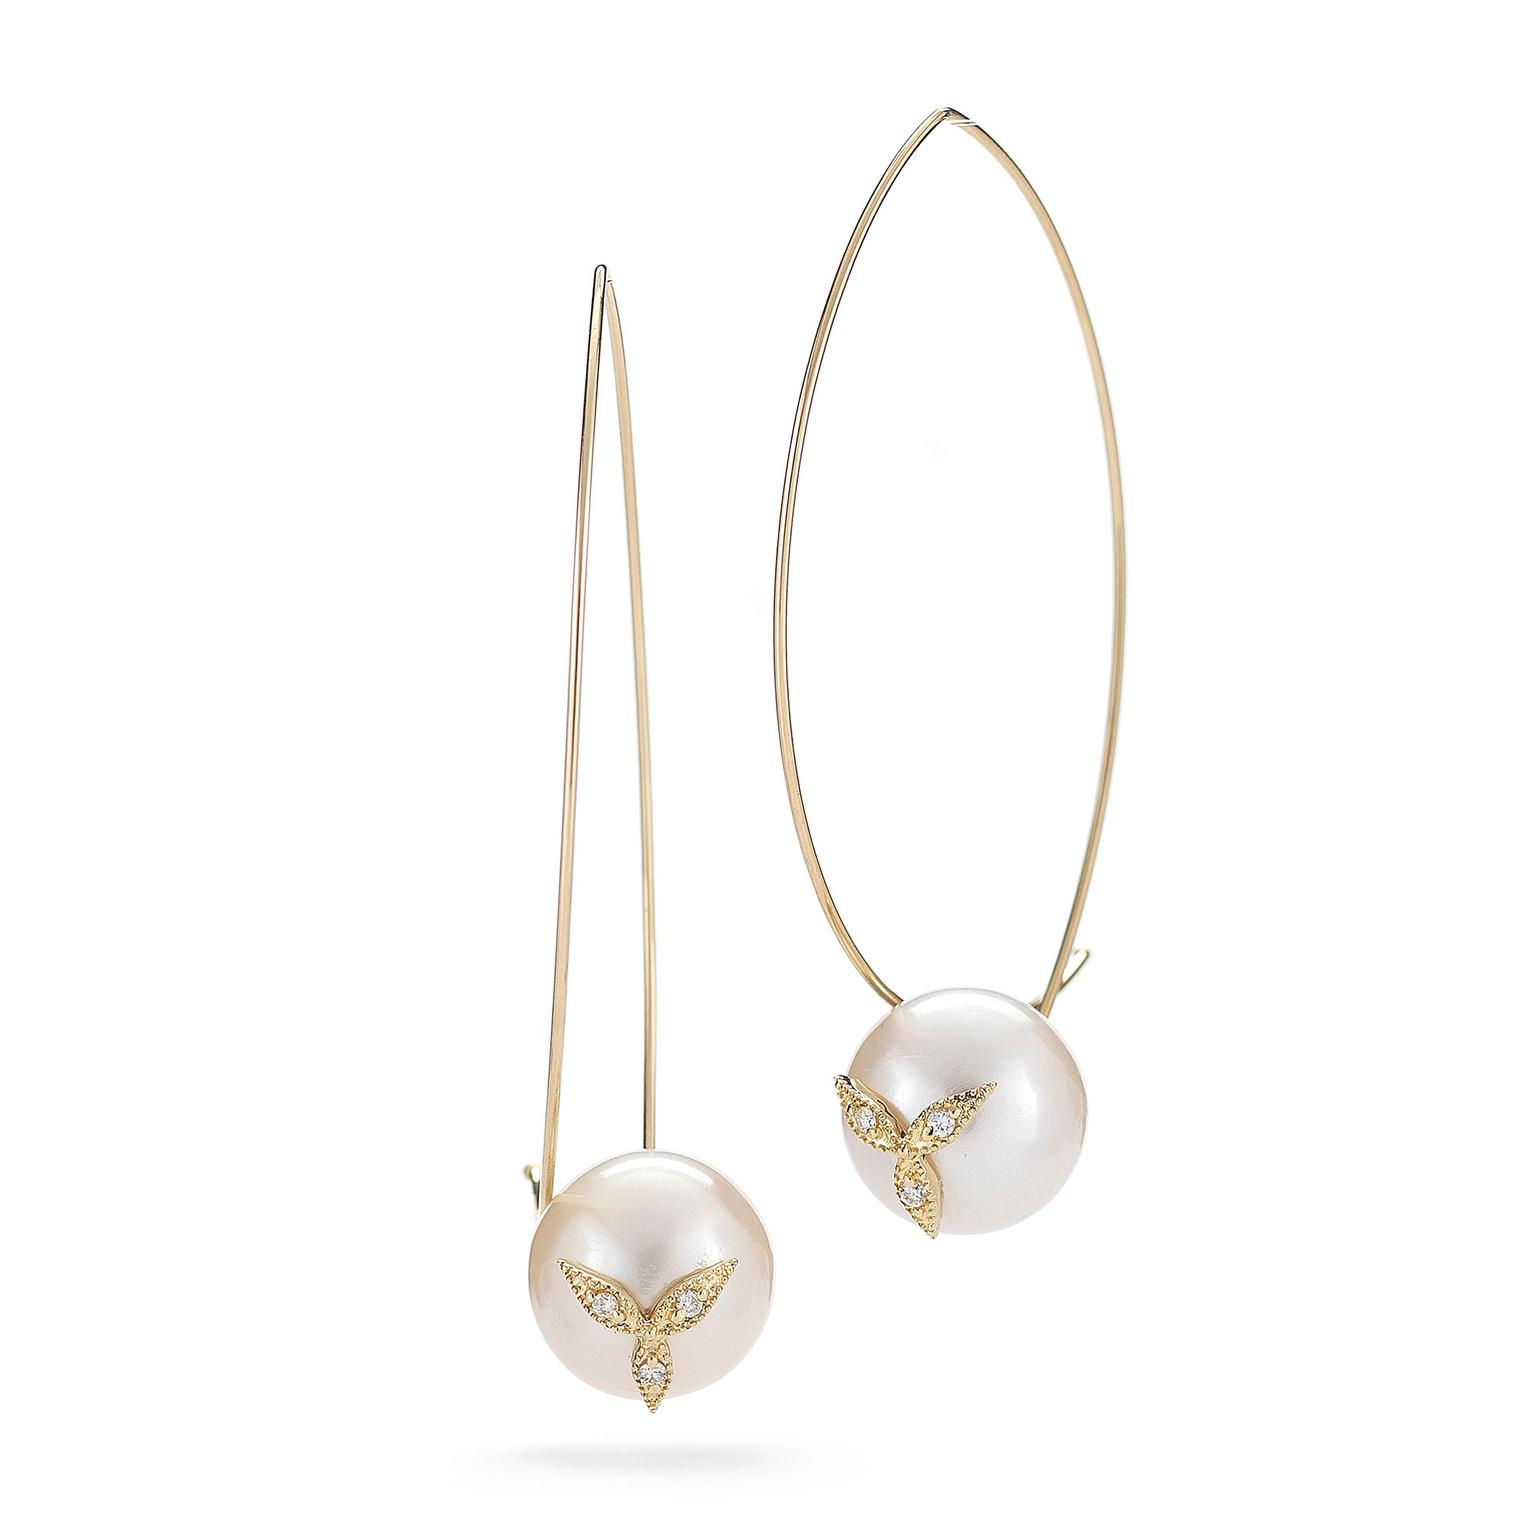 Yellow gold wire hoop earrings by Mizuki set with 11.5mm Freshwater pearls